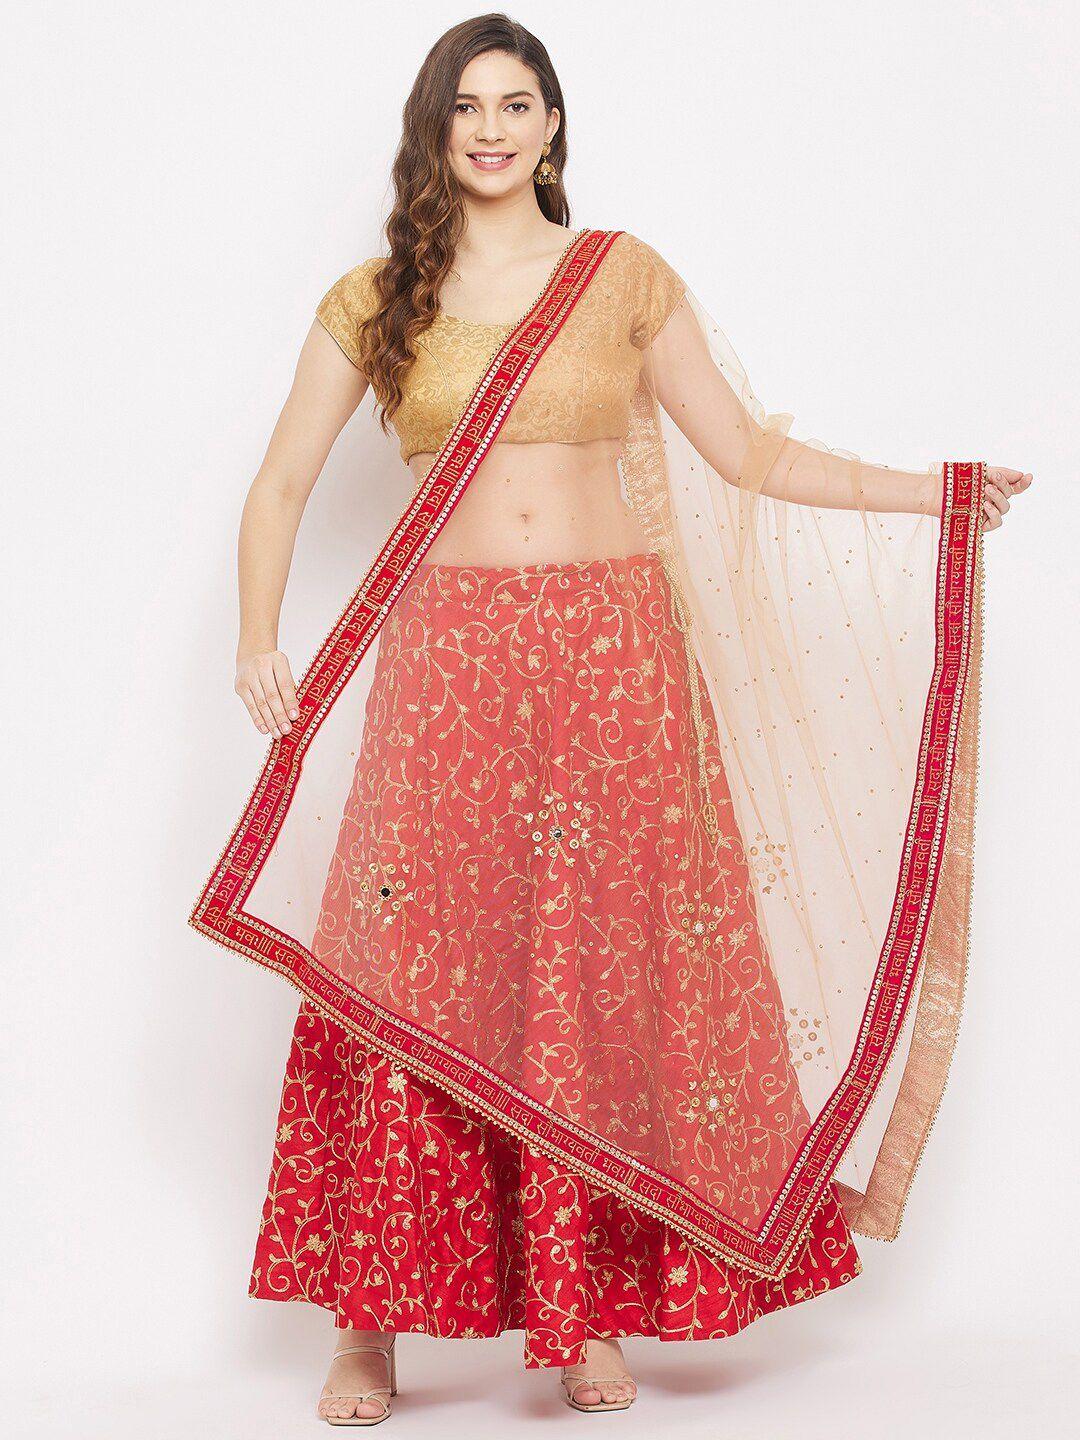 Clora Creation Beige & Red Ethnic Motifs Embroidered Dupatta with Beads and Stones